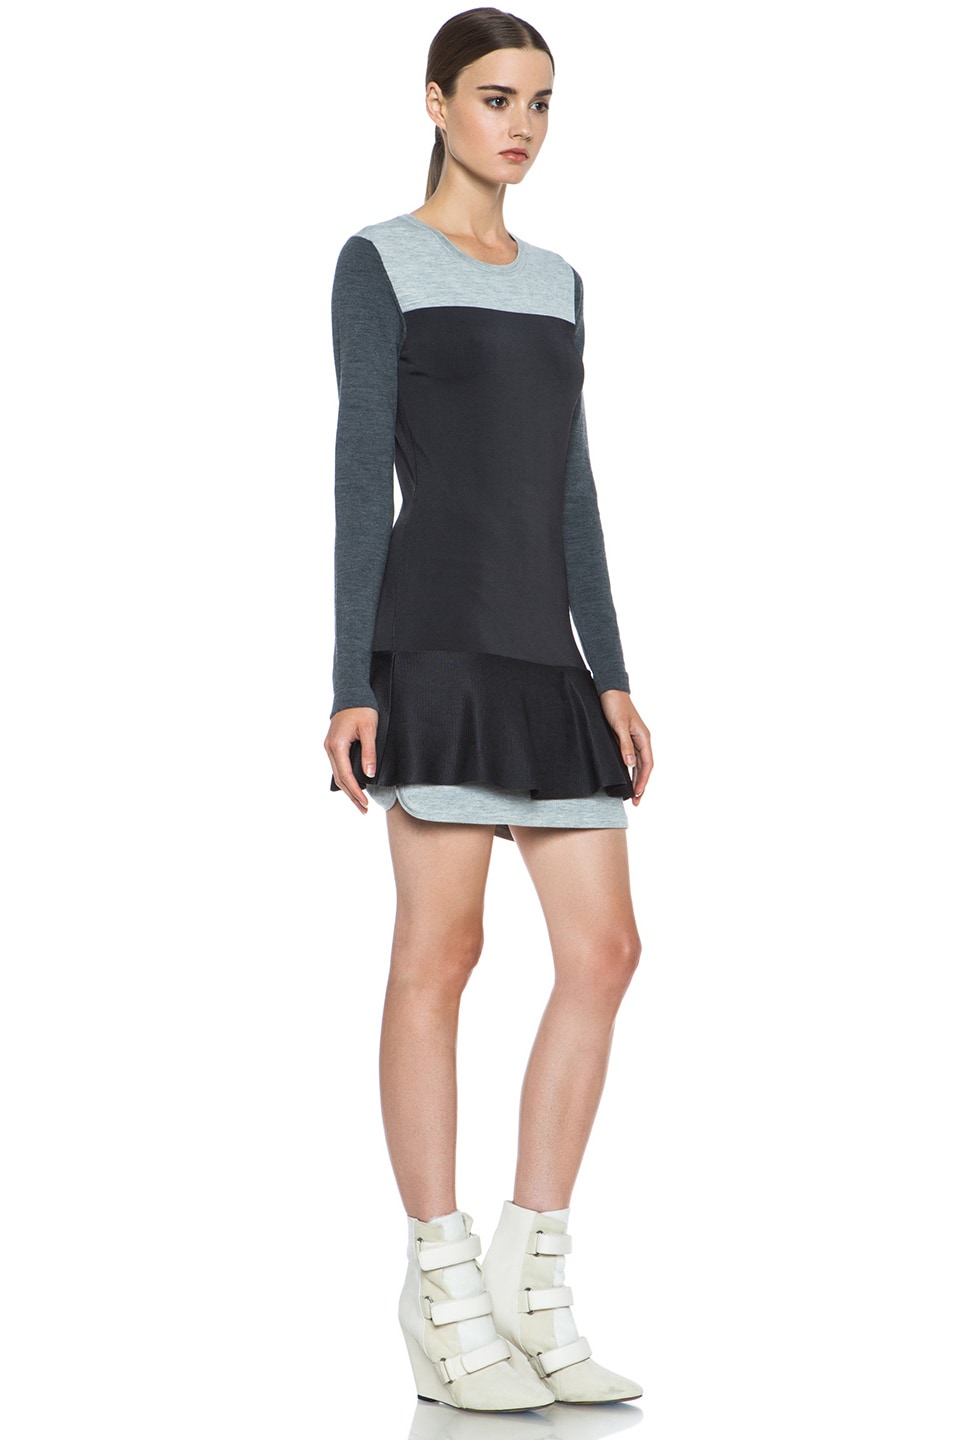 Isabel Marant Adams Color Block Knit Dress in Anthracite & Light Grey